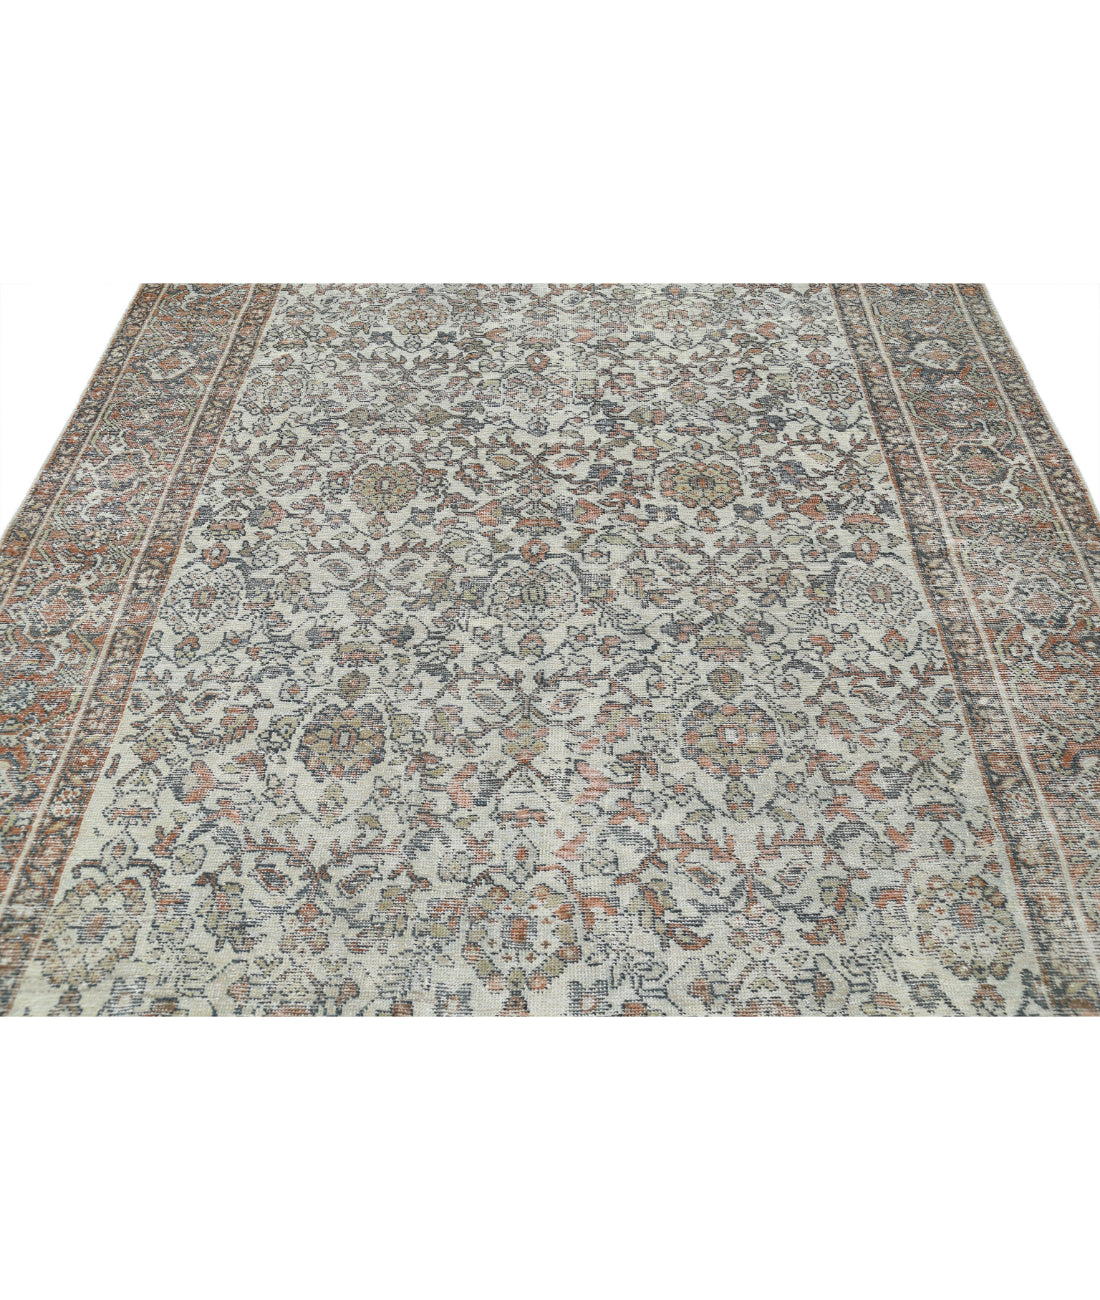 Hand Knotted Antique Persian Mahal Wool Rug - 7'0'' x 10'5'' 7'0'' x 10'5'' (210 X 313) / Ivory / Rust